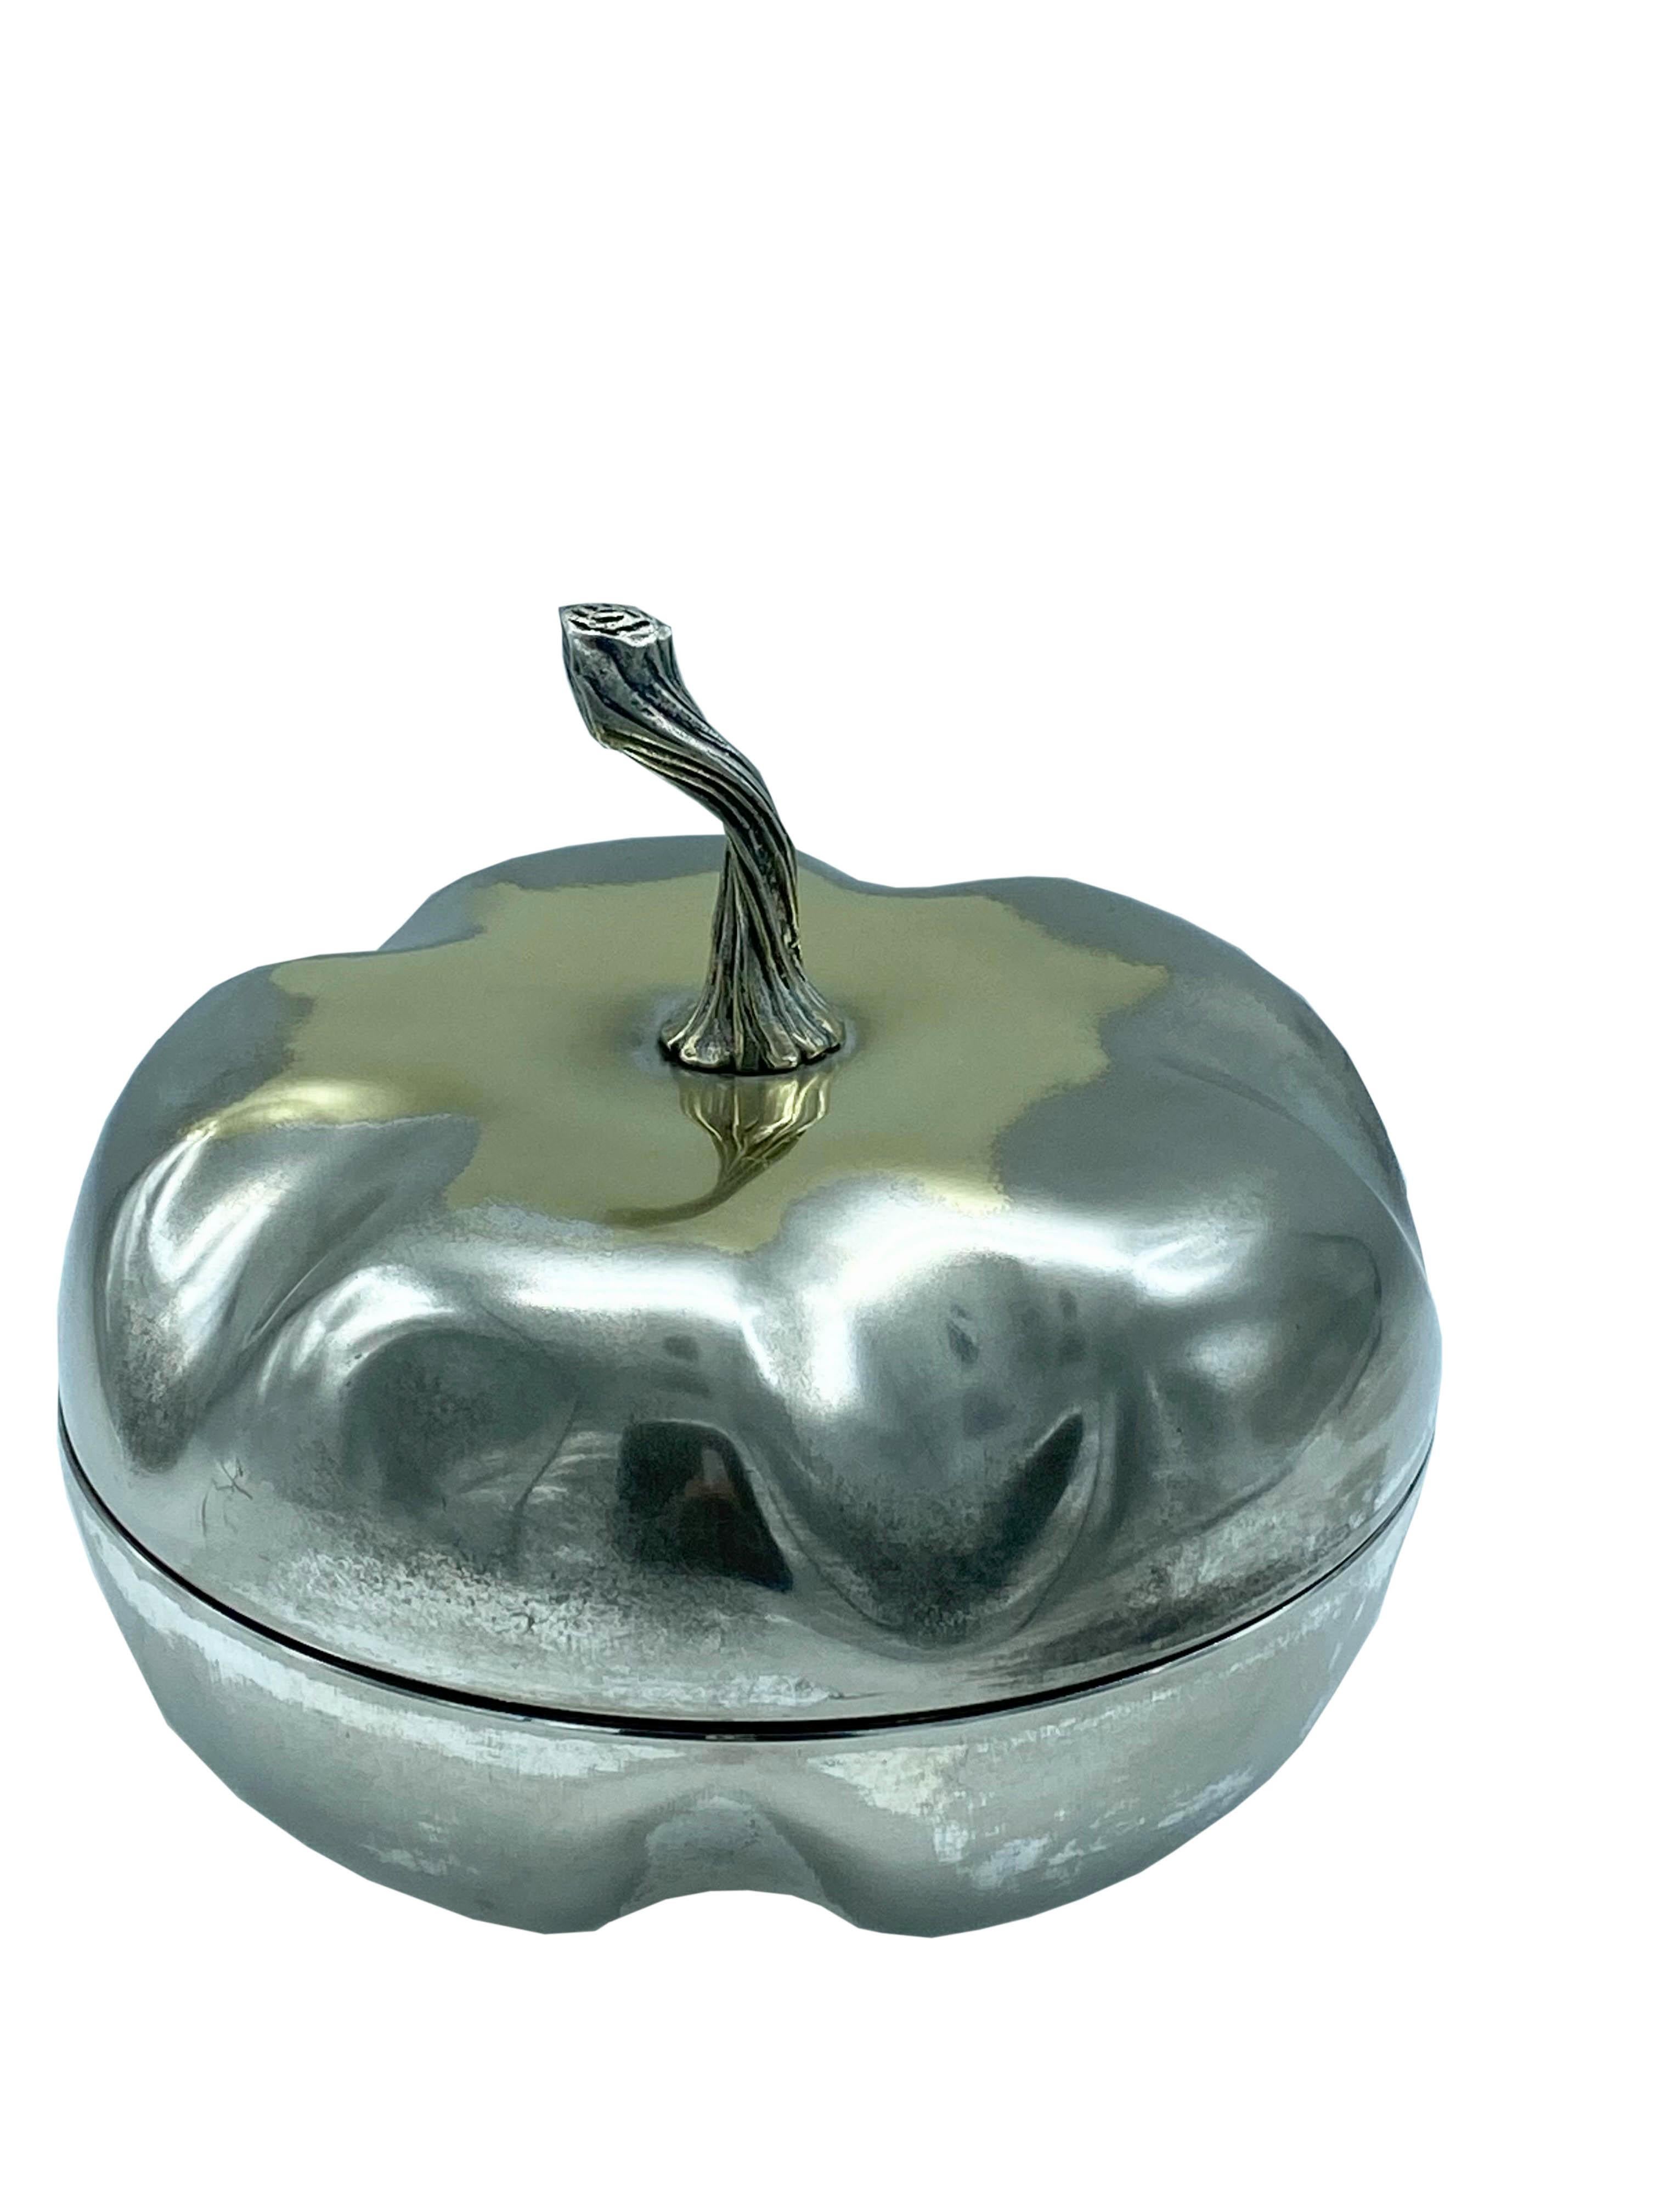 Elegant decorative box in the shape of a pumpkin designed by Christian Dior for his 1970s Home collection. This beautiful decorative box with lid is made of silver plated metal with a well shaped design.